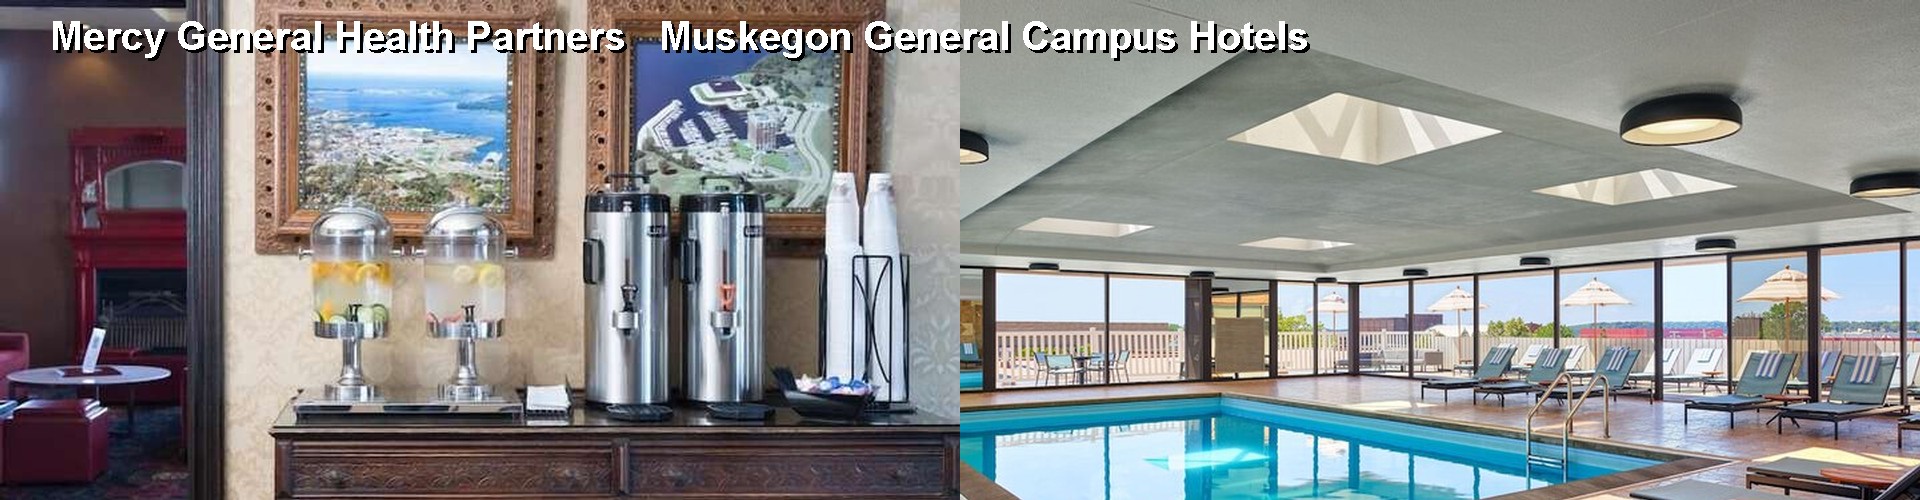 5 Best Hotels near Mercy General Health Partners   Muskegon General Campus